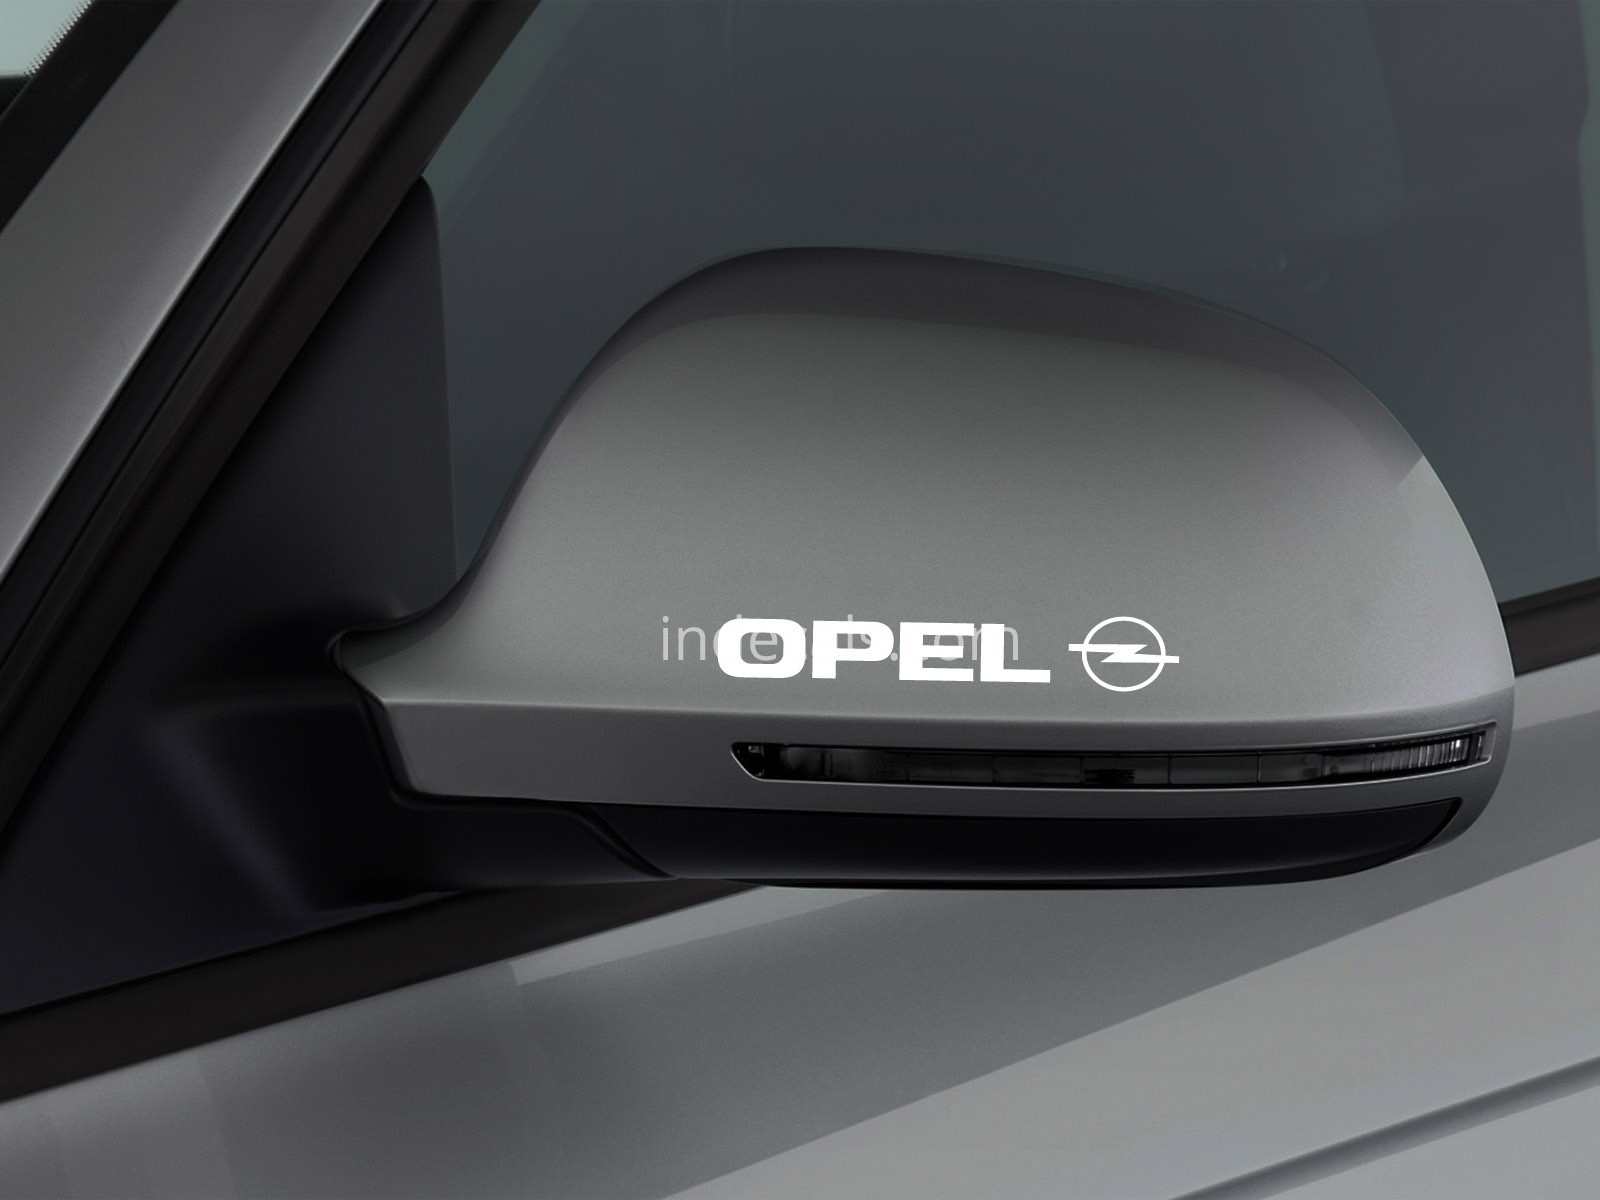 3 x Opel Stickers for Mirror - White